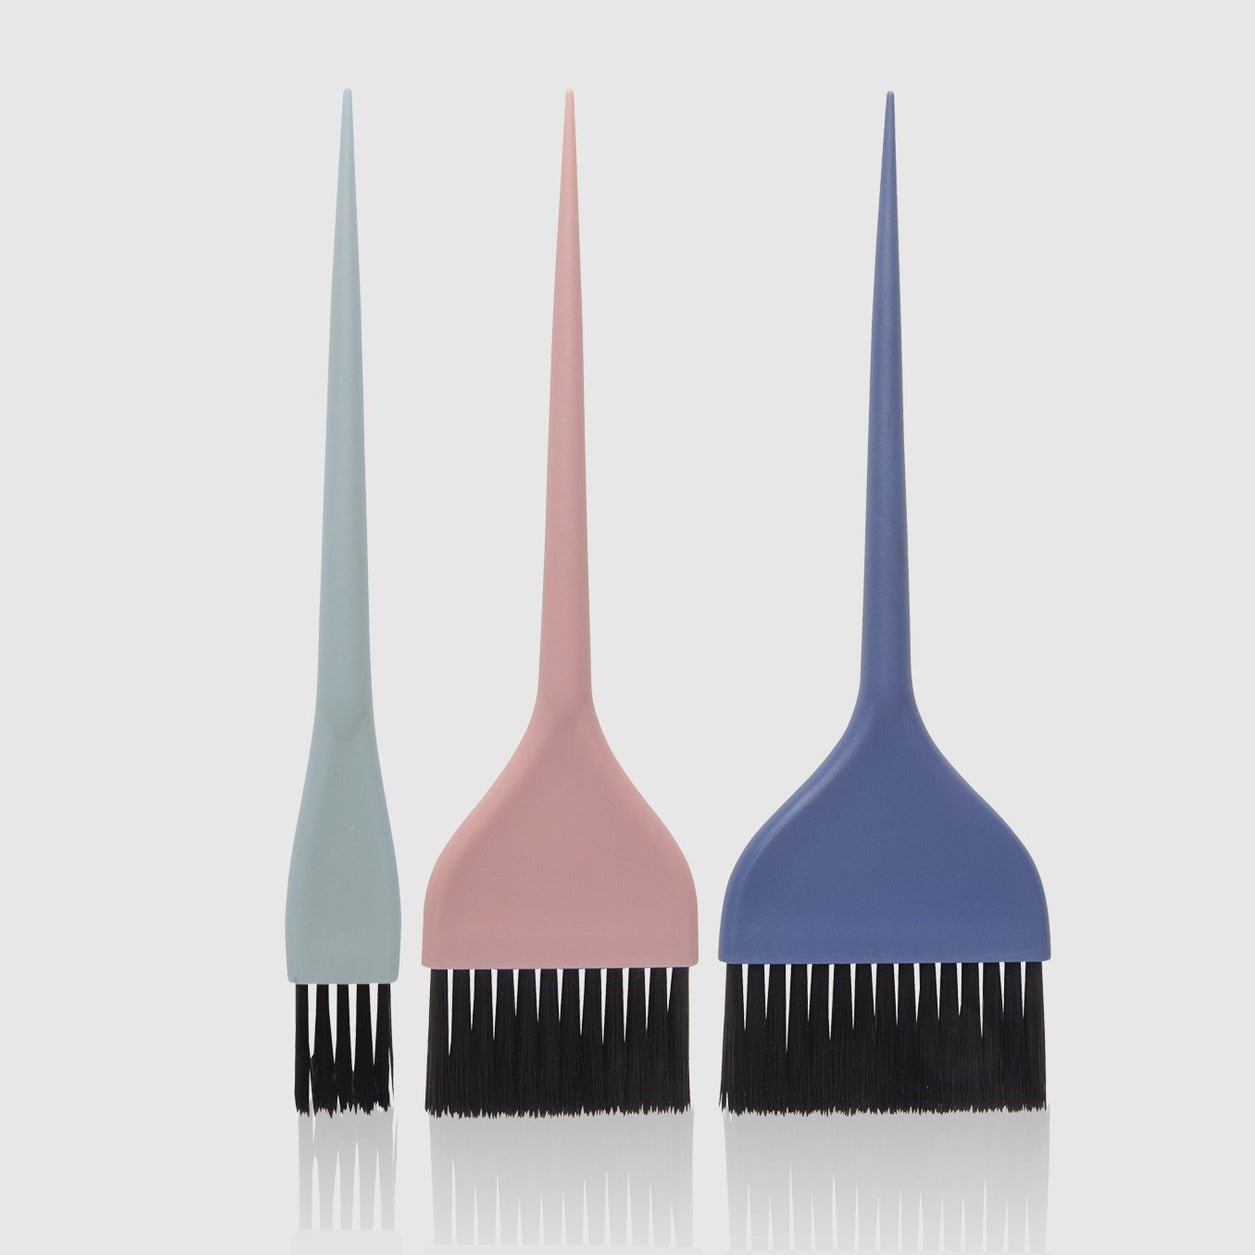 SOFT COLOR BRUSH | 3 PACK | F9418 | FROMM - SH Salons